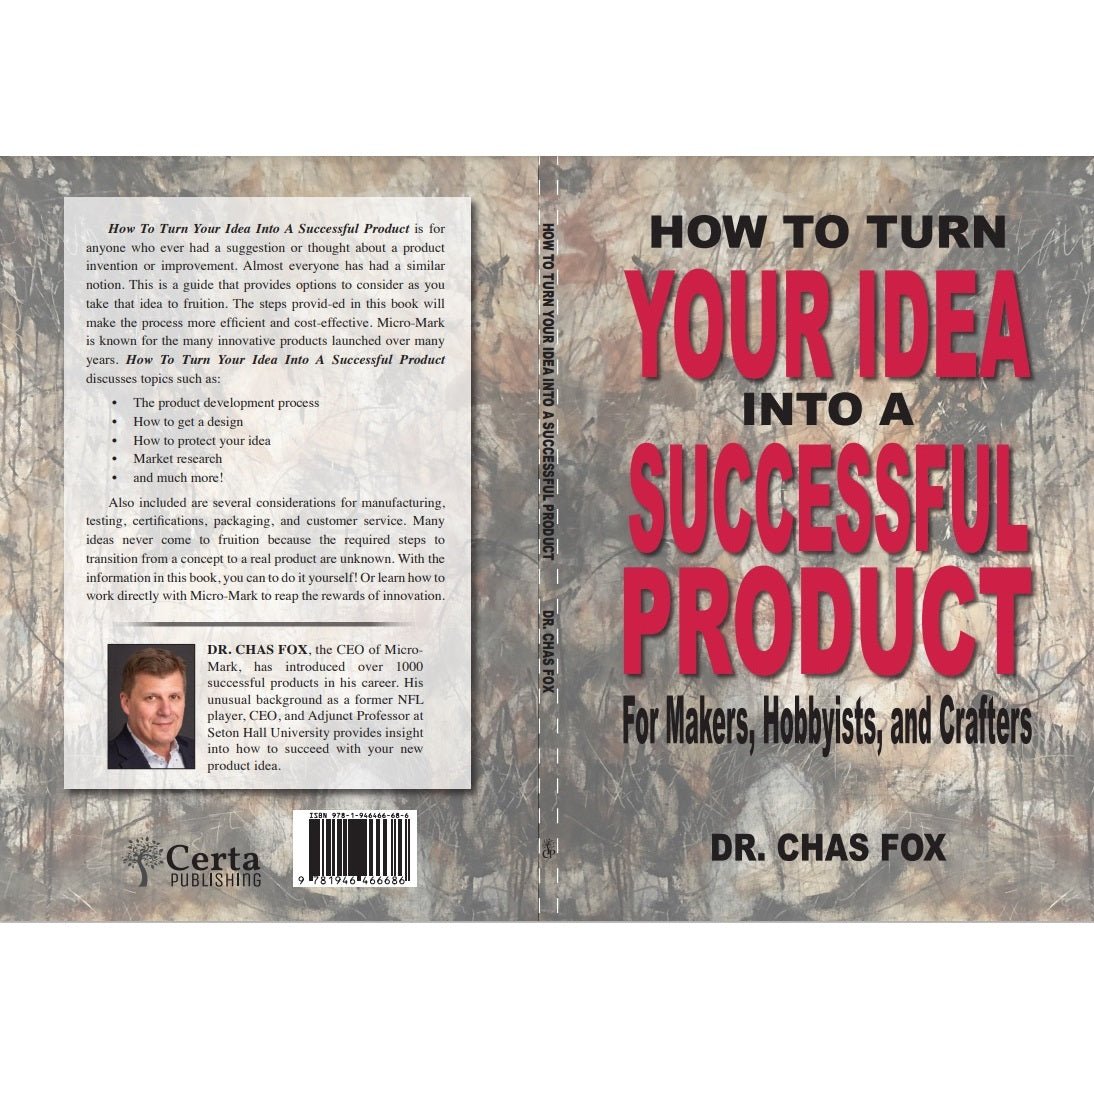 How to Turn Your Idea Into a Successful Product by Dr. Chas Fox